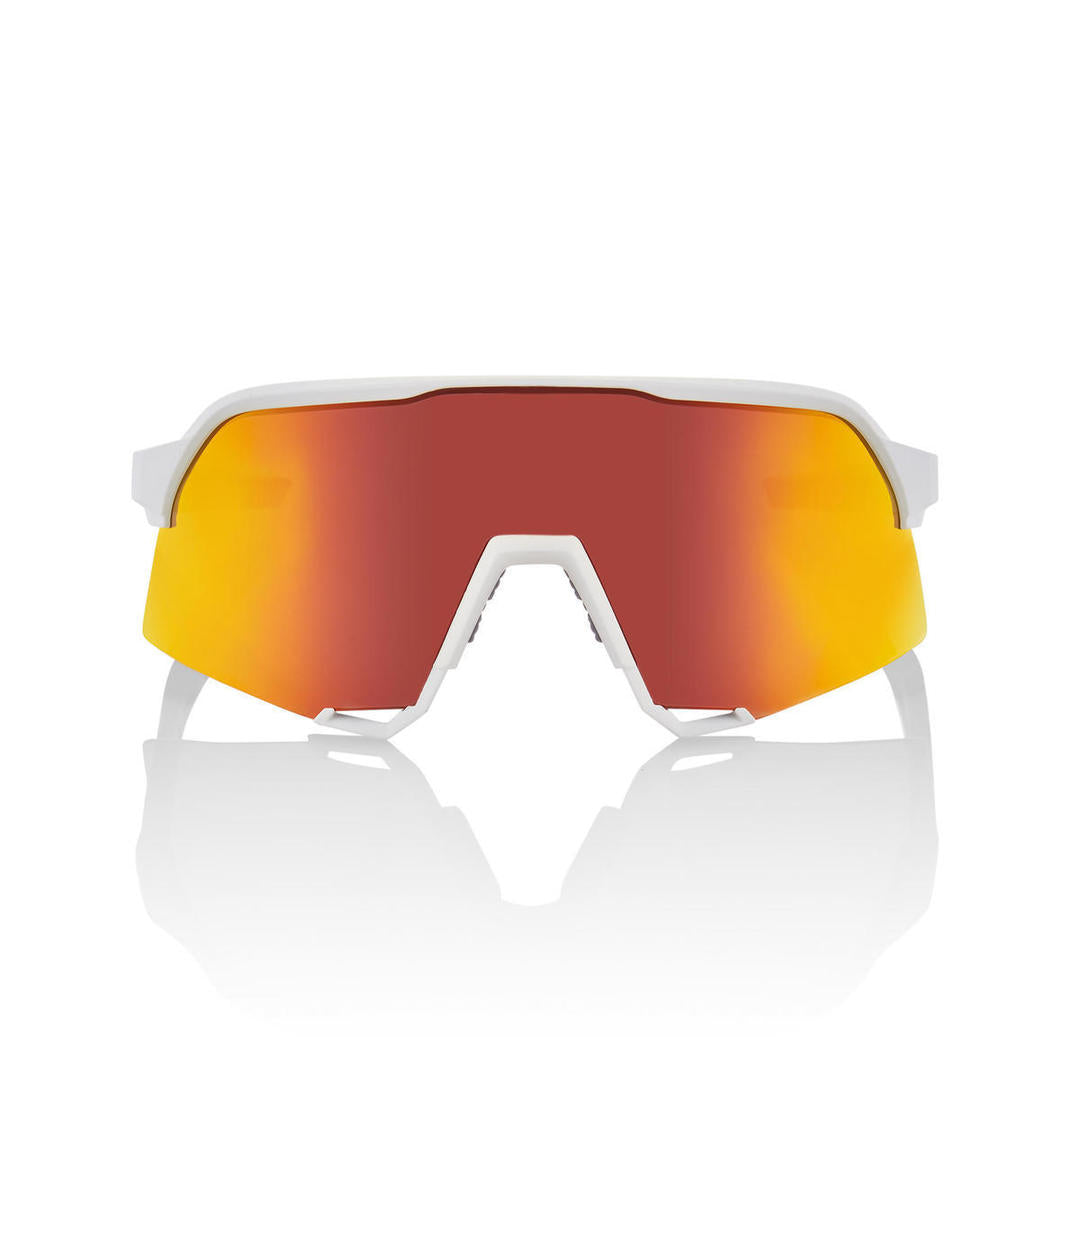 RIDE 100% Ulleres de sol S3 - Soft Tact White Hiper Red Multilayer Mirror Lens